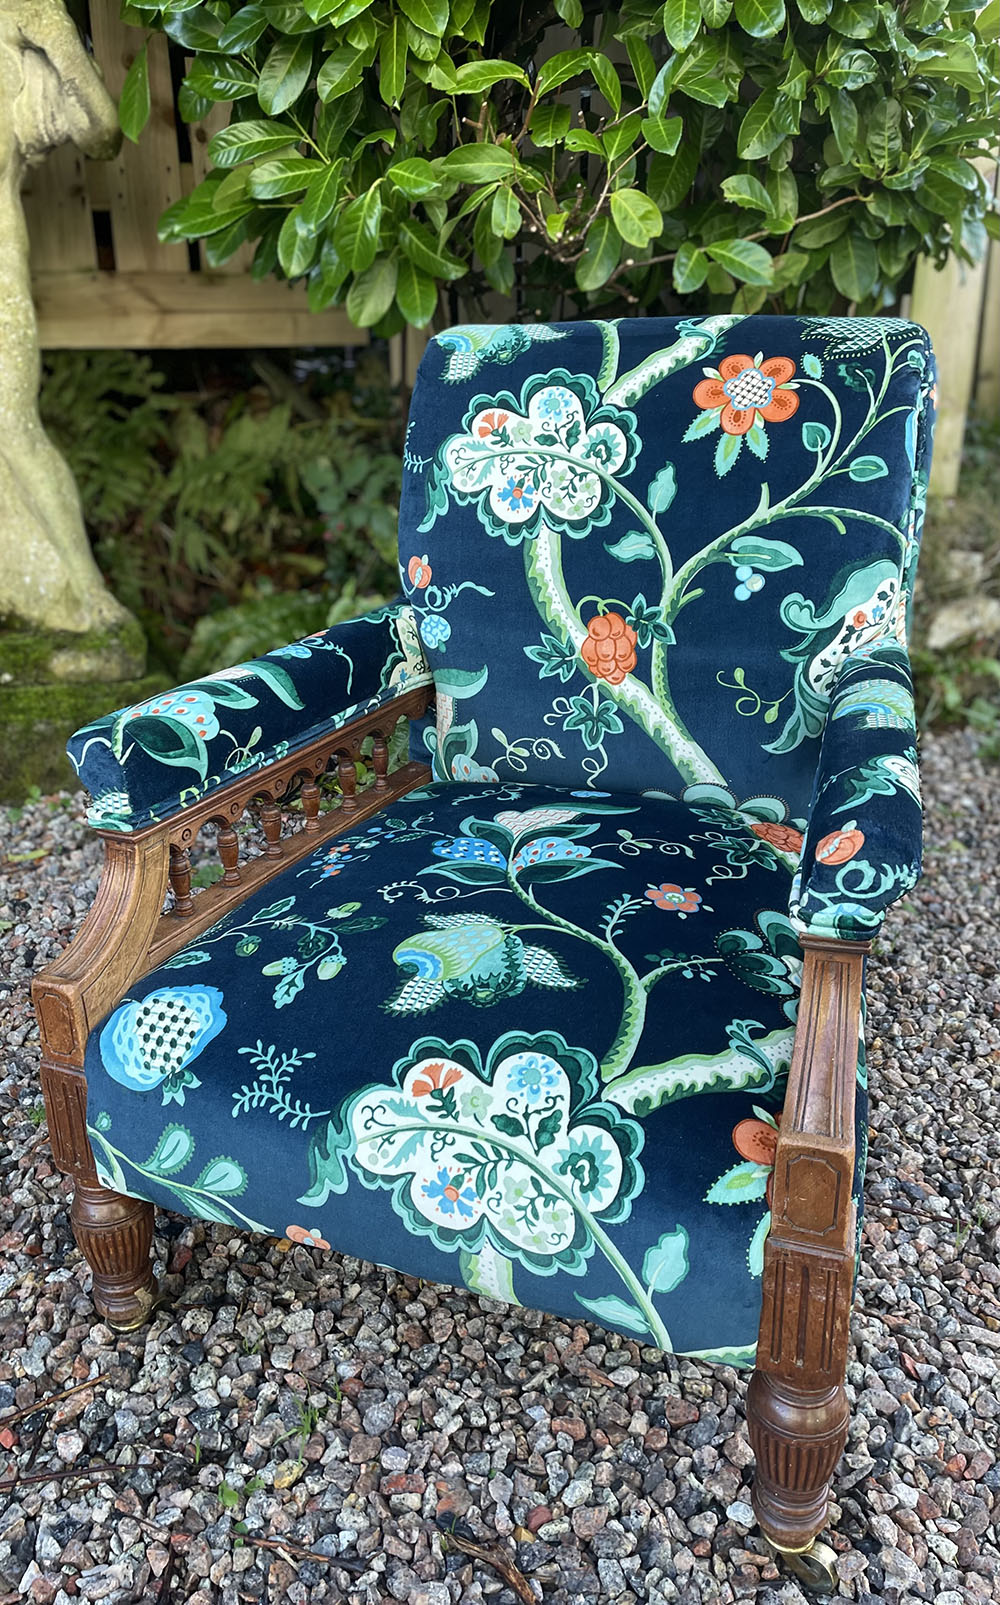 floral chair from fabricandfurniture